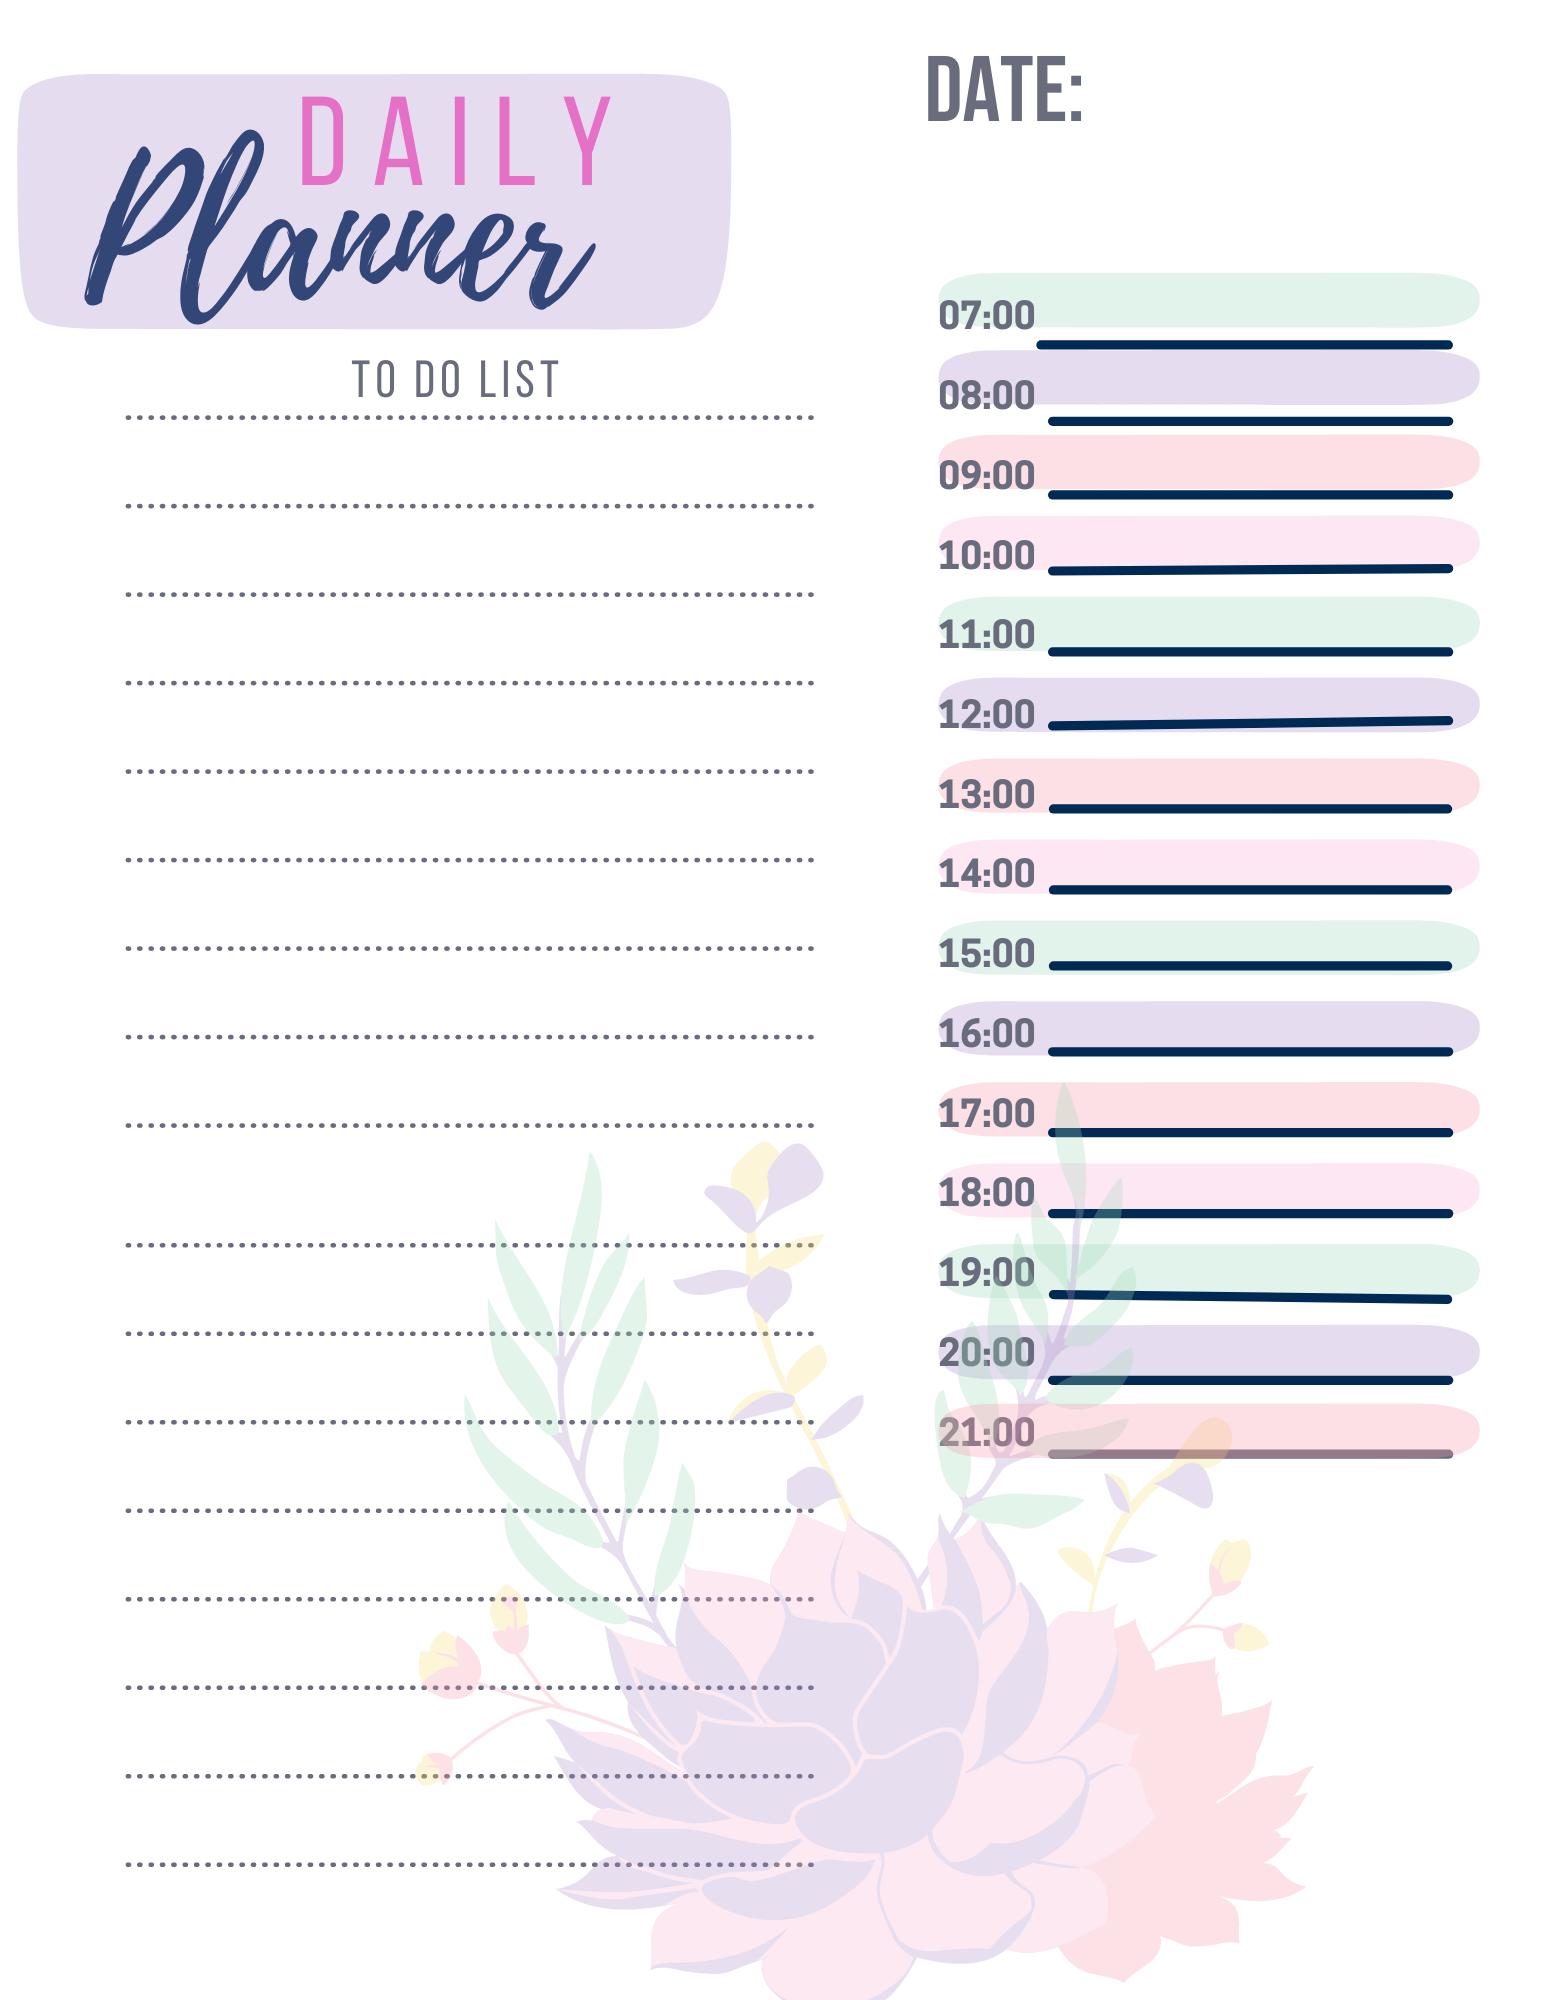 Pink and Purple Succulent Daily Planning Sheet Digital Download-Calendars, Organizers & Planners-5.25 Designs-5.25designs-veteran-family business-florida-melbourne-orlando-knit-crochet-small business-